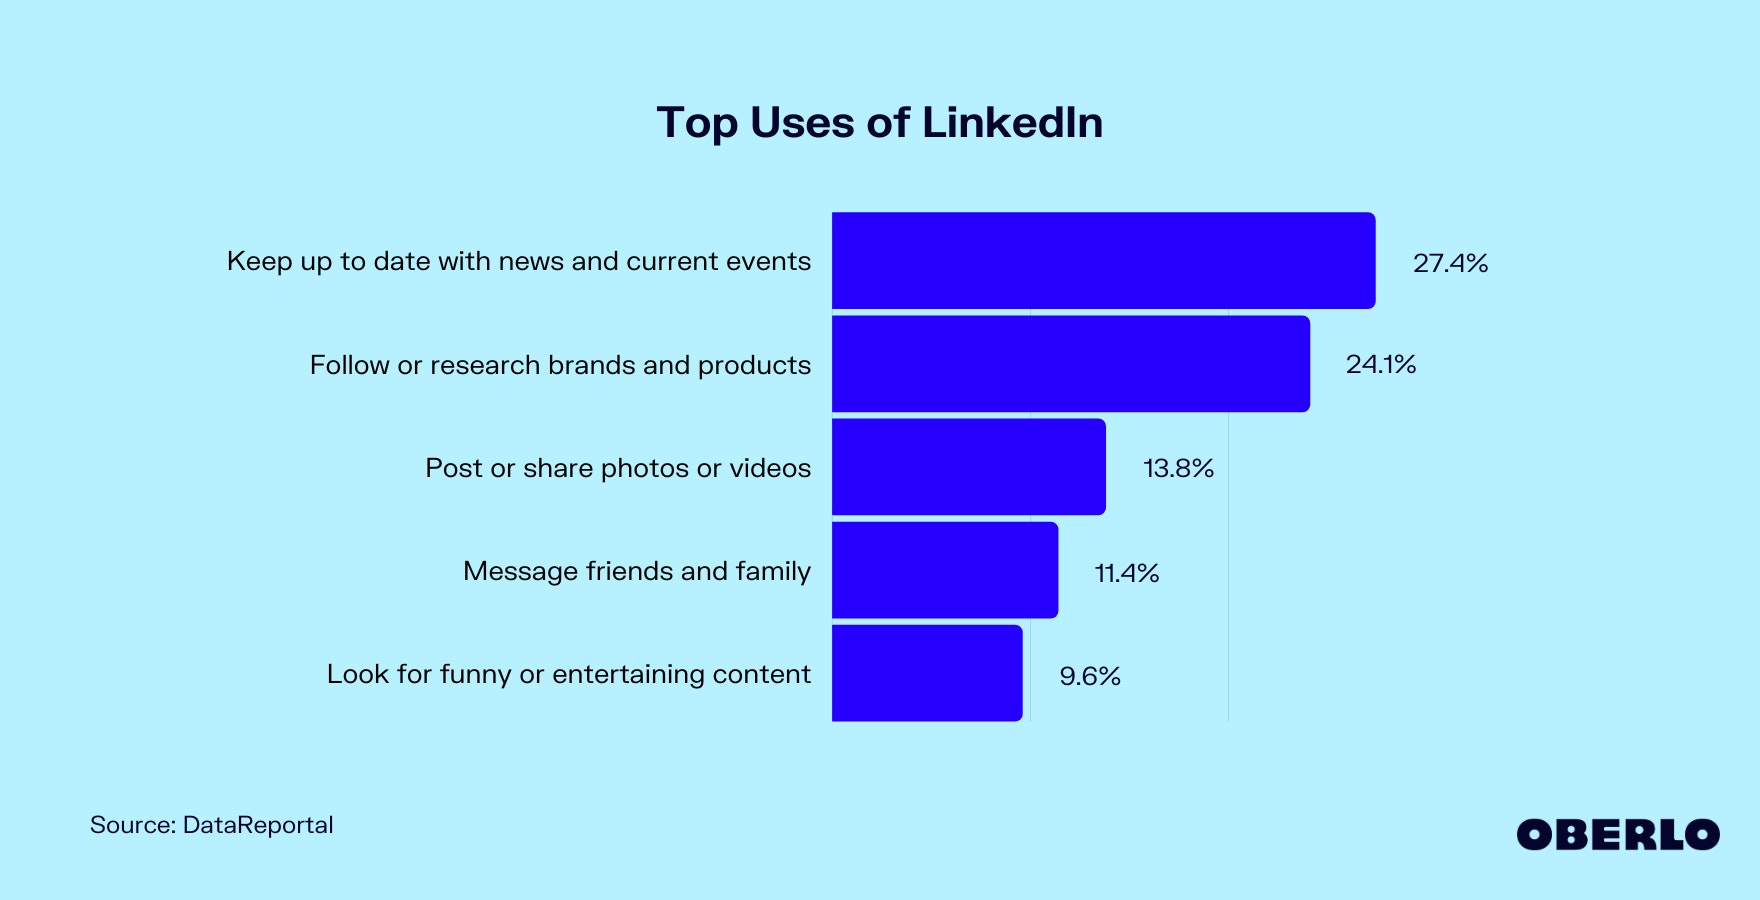 Chart showing the top uses of LinkedIn